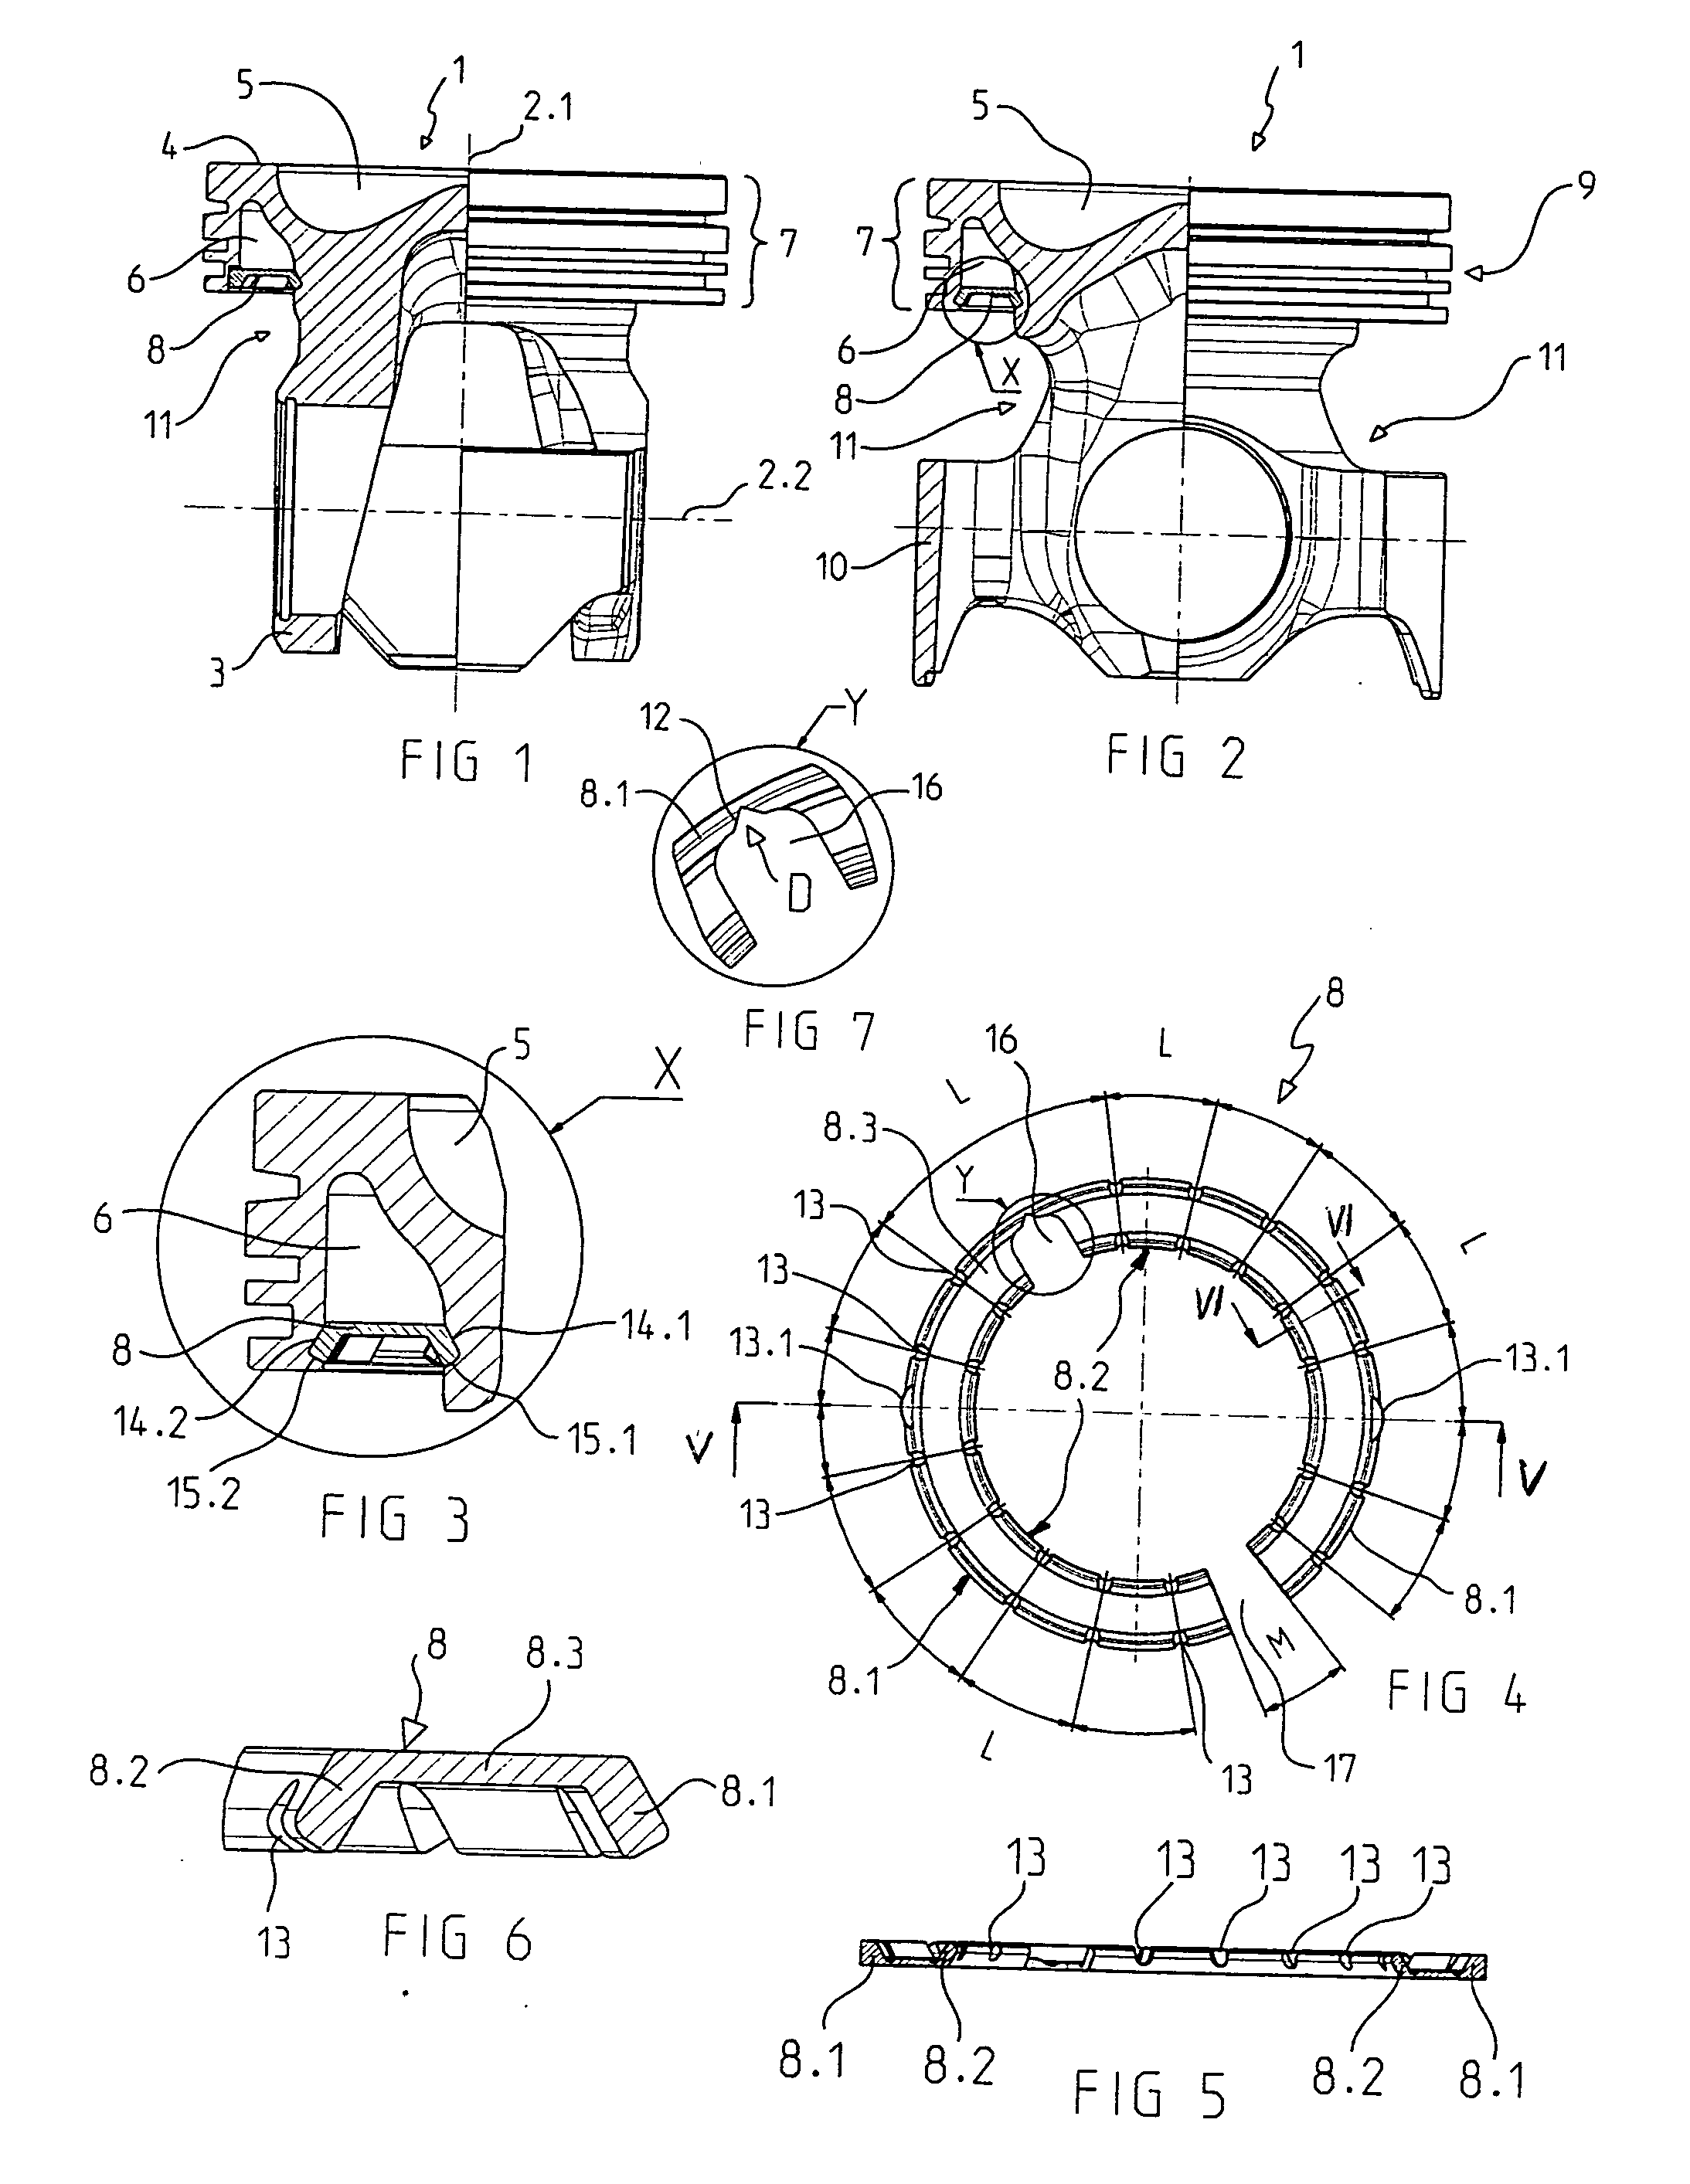 Cooling channel cover for a one-piece piston of an internal combustion engine